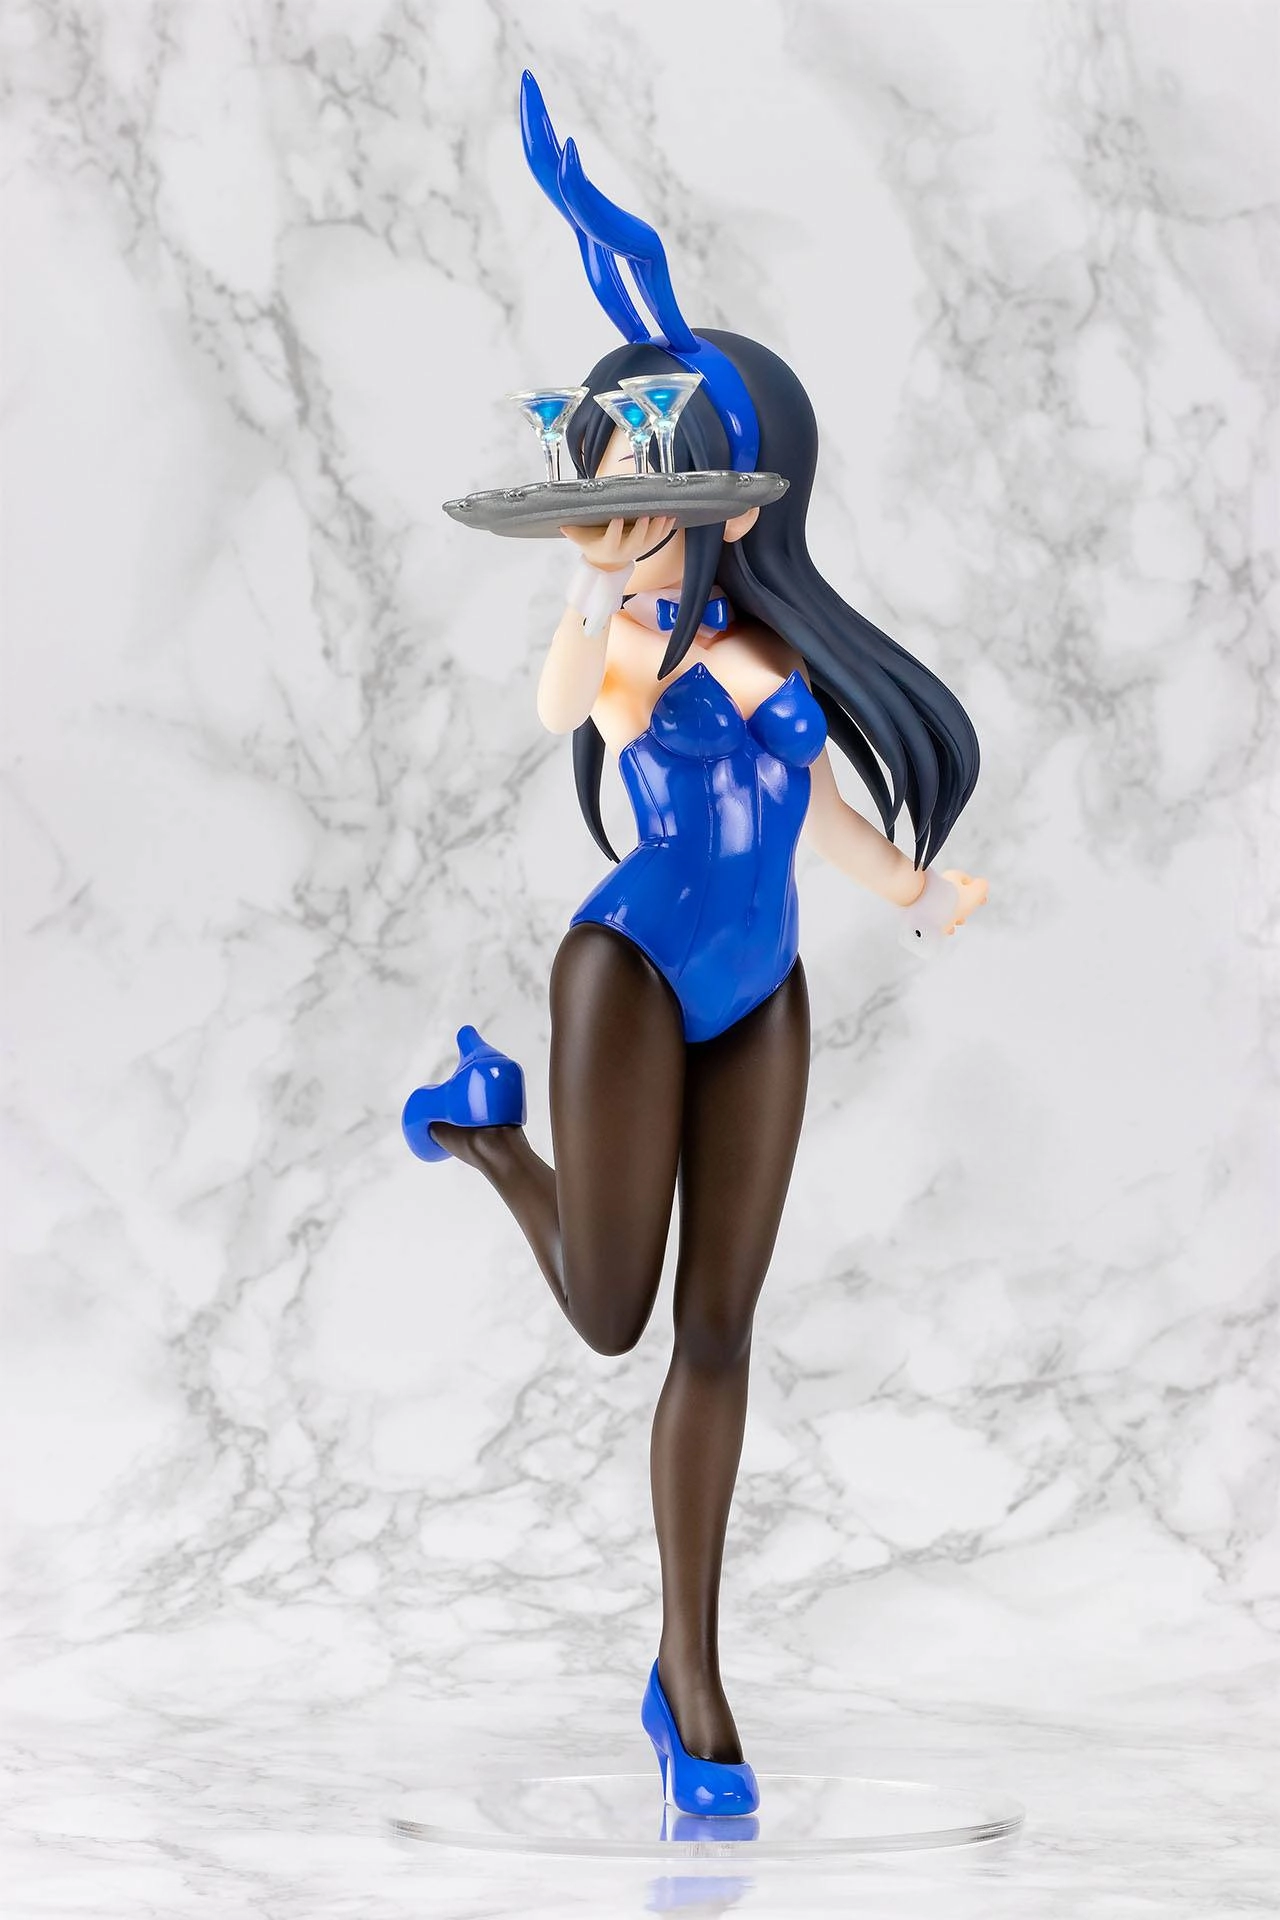 My Little Sister Can´t Be This Cute statuette 1/5 Ayase Aragaki Resized Ver. 32 cm